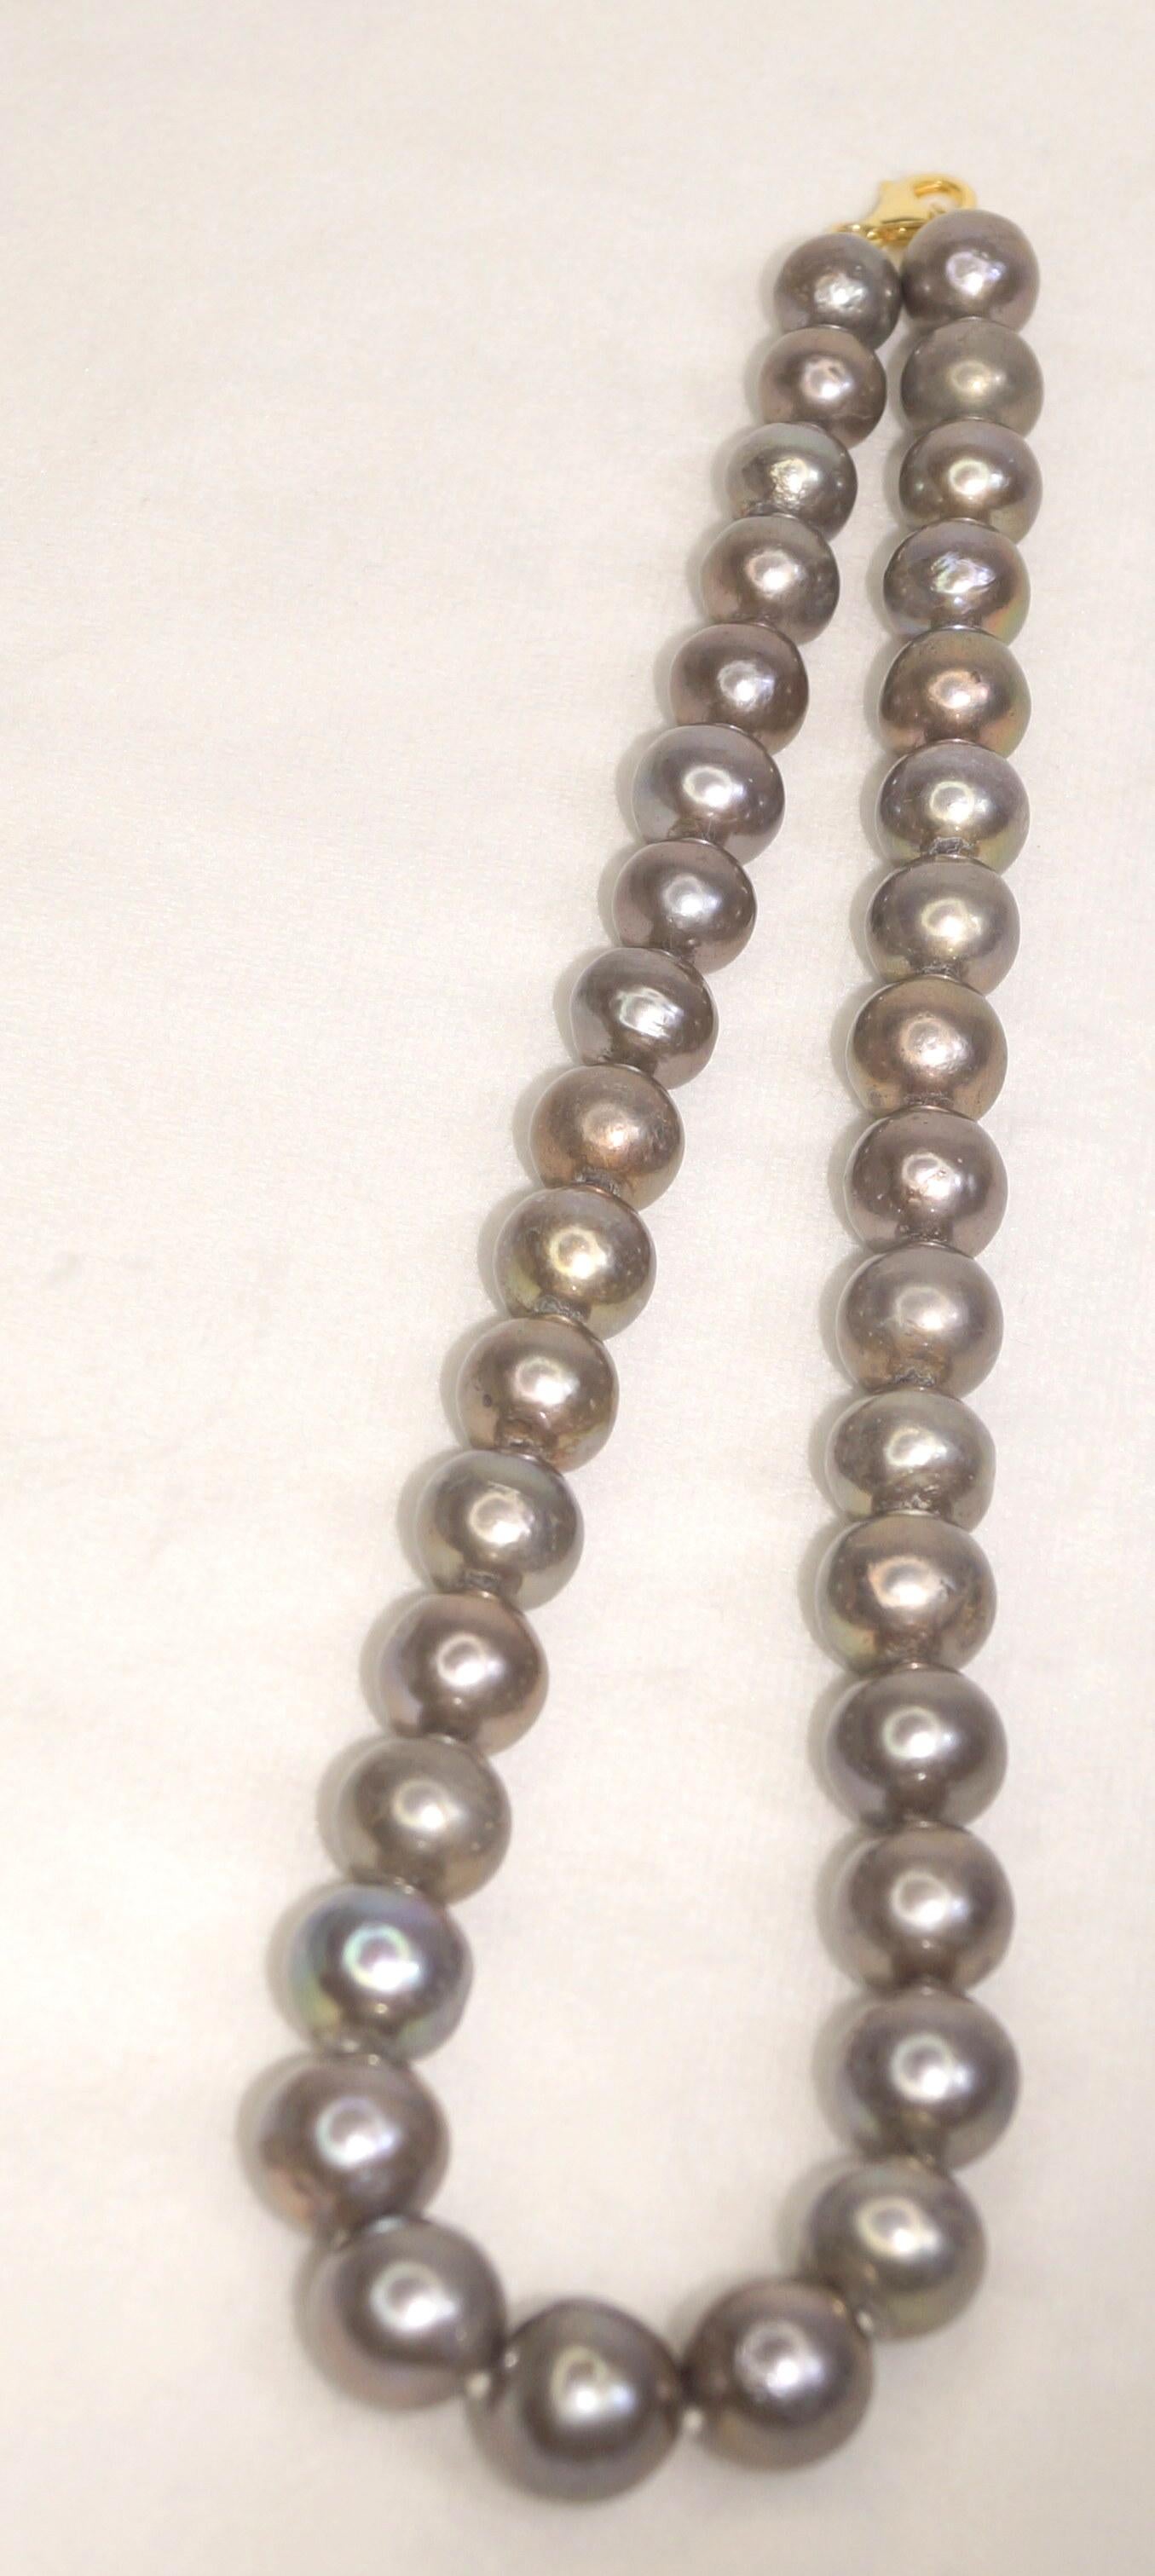 Women's or Men's 14k Gold Grey Pearl necklace 11-14mm Big Rare Natural Tahitian Pearl necklace For Sale